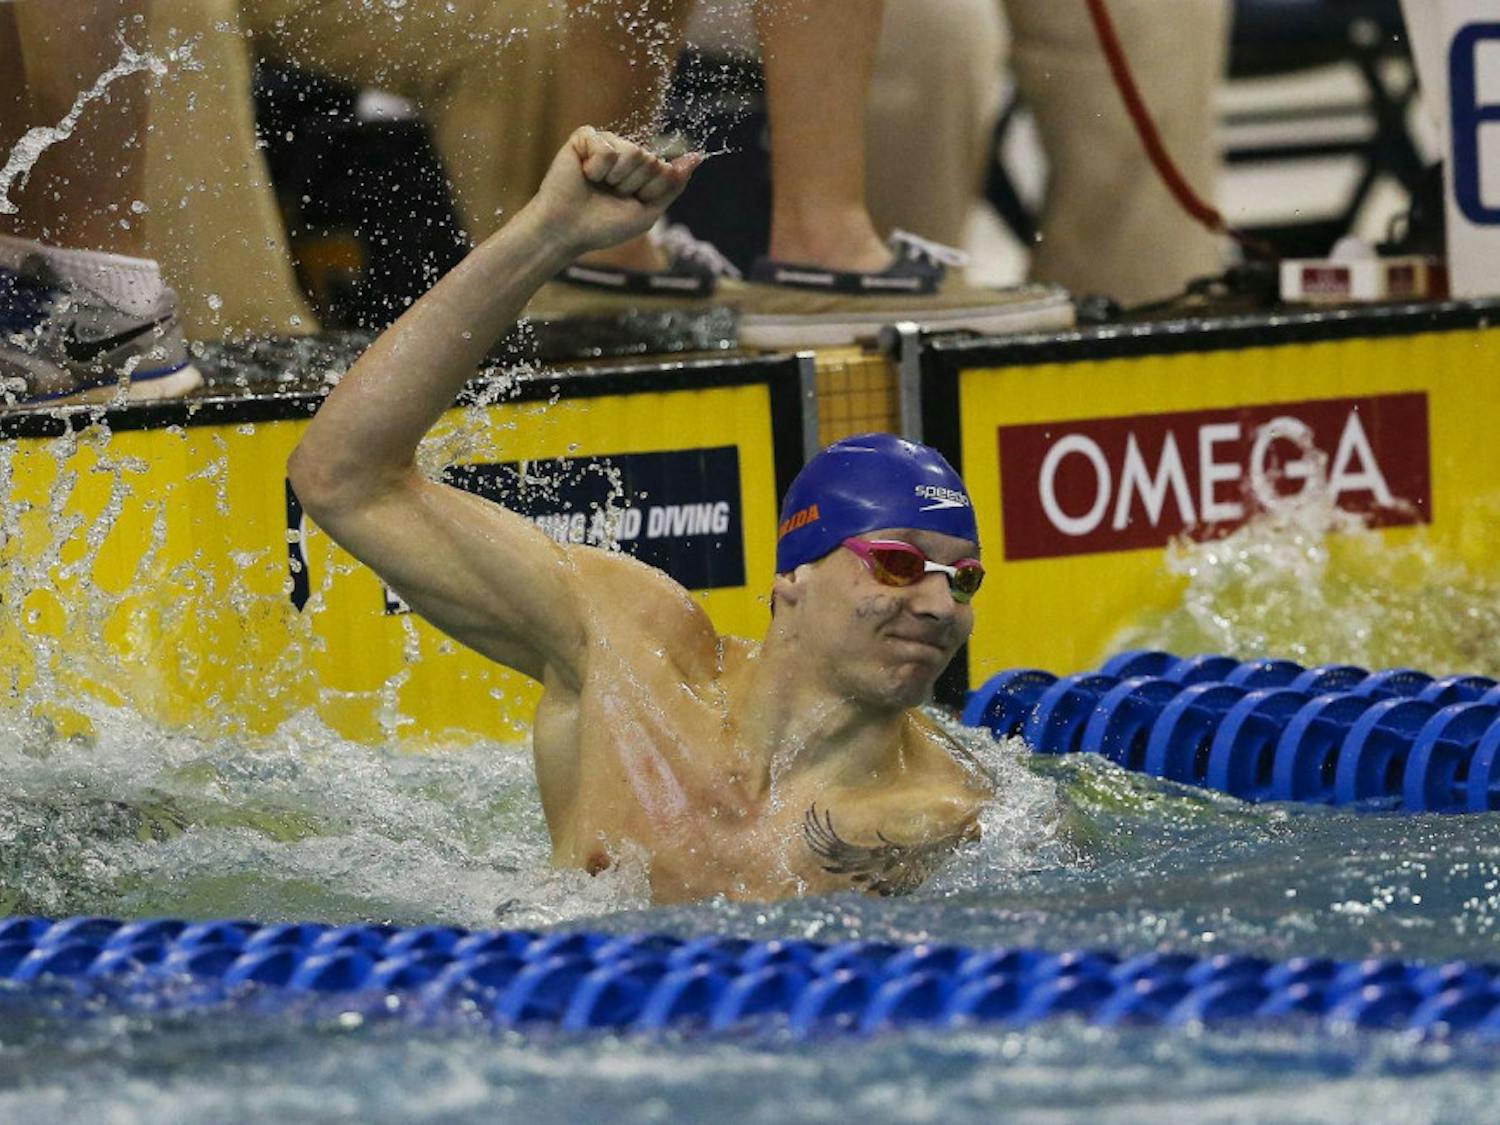 Former Gators swimmer Caeleb Dressel broke four World Records this month alone while representing the Cali Condors in the ISL.